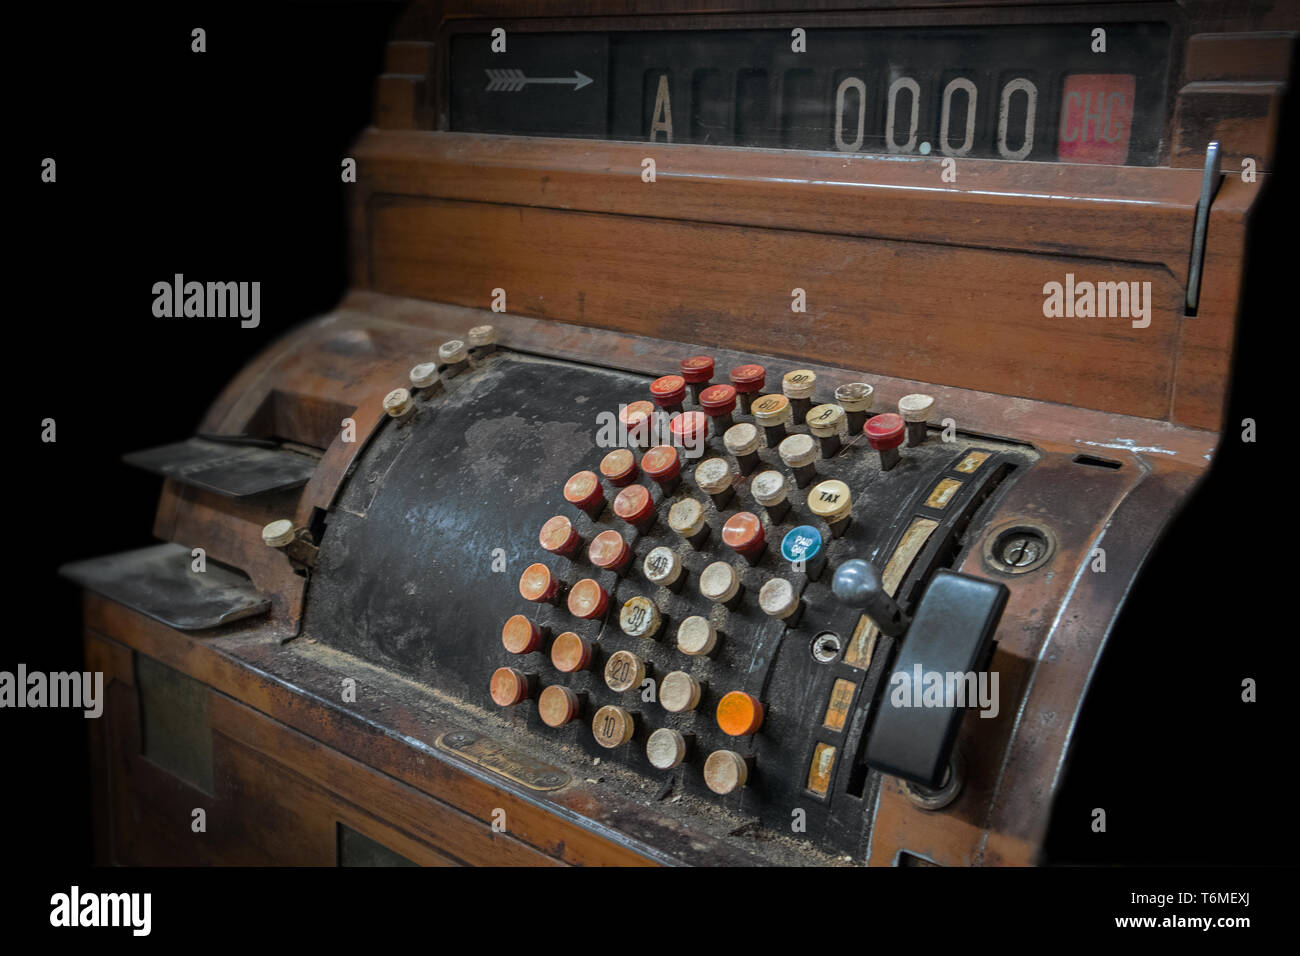 Antique cash register made of wood, Low key. Stock Photo